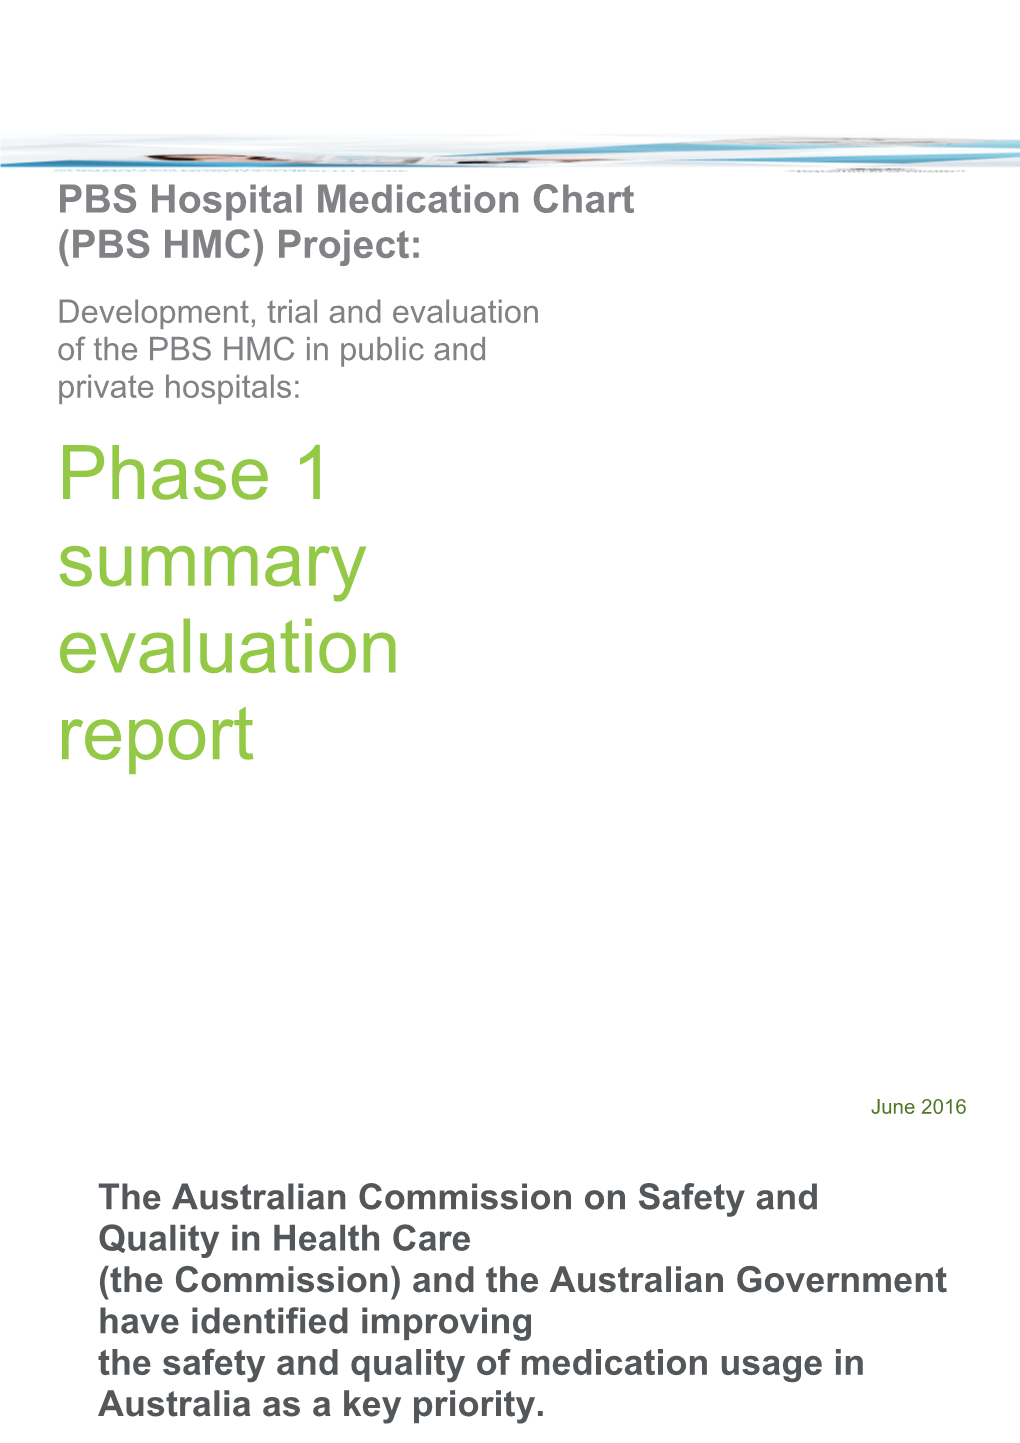 The Australian Commission on Safety and Quality in Health Care (Thecommission) and The